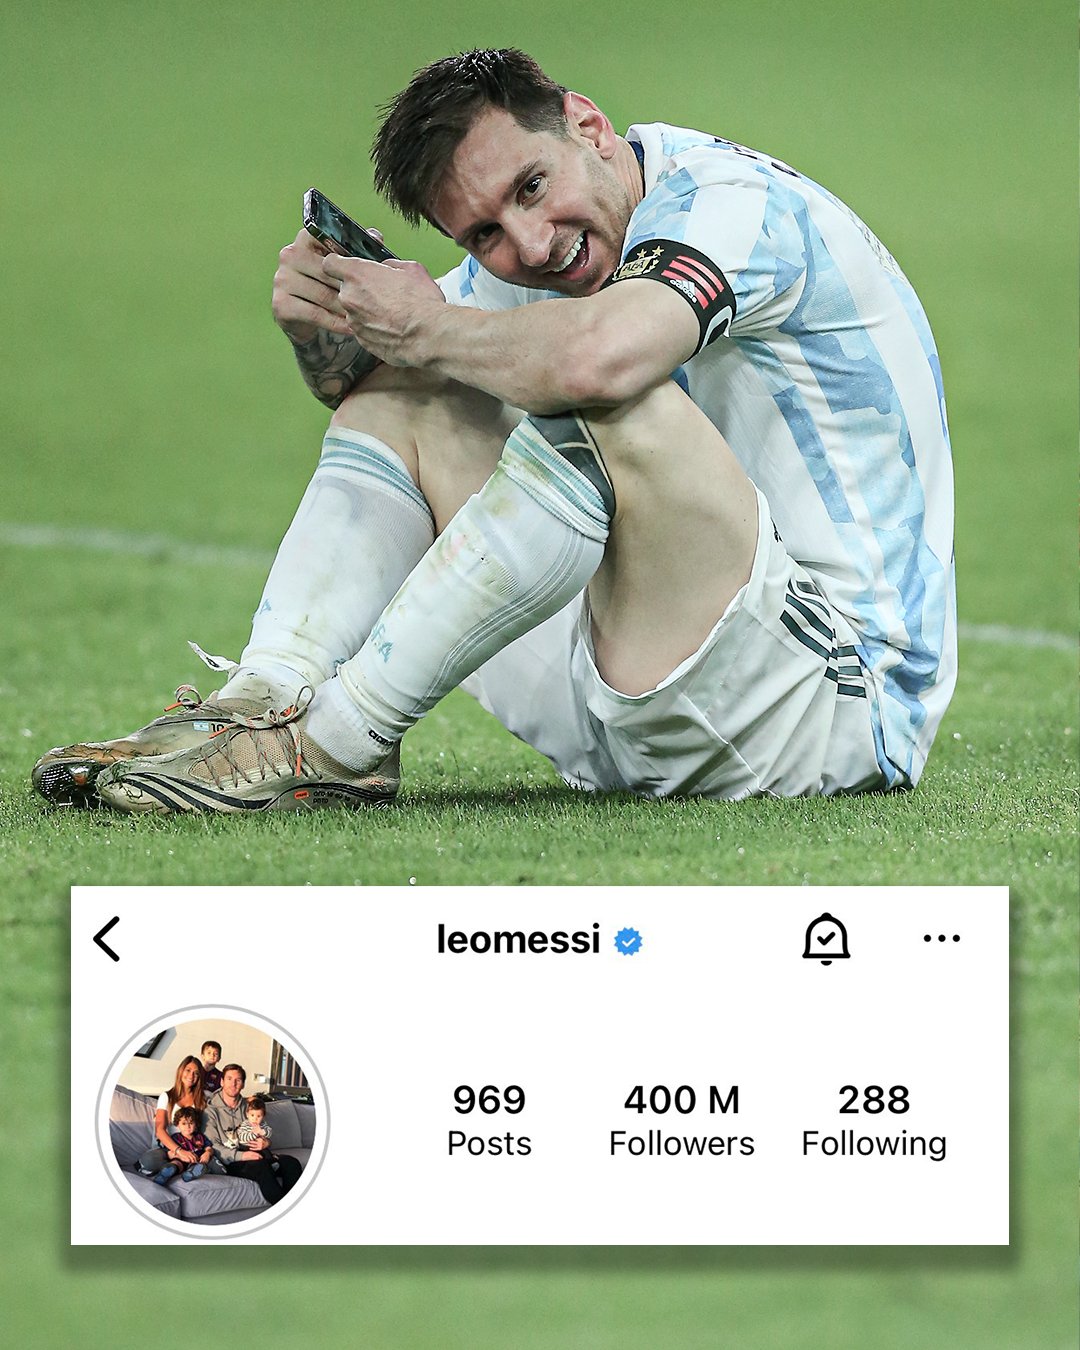 ESPN FC on Twitter: "Lionel Messi now has 400M followers on Instagram ?? https://t.co/7llrqy3Bup" / Twitter